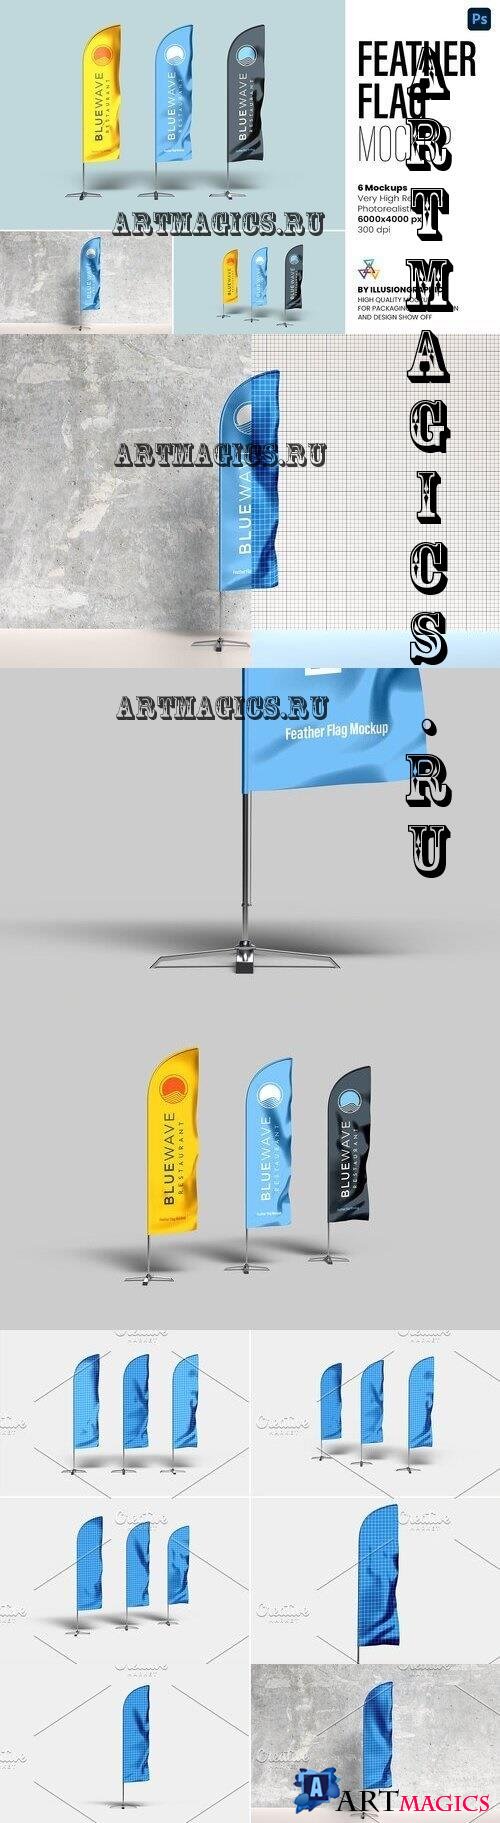 Feather Flag Mockup - 6 views - 7367179